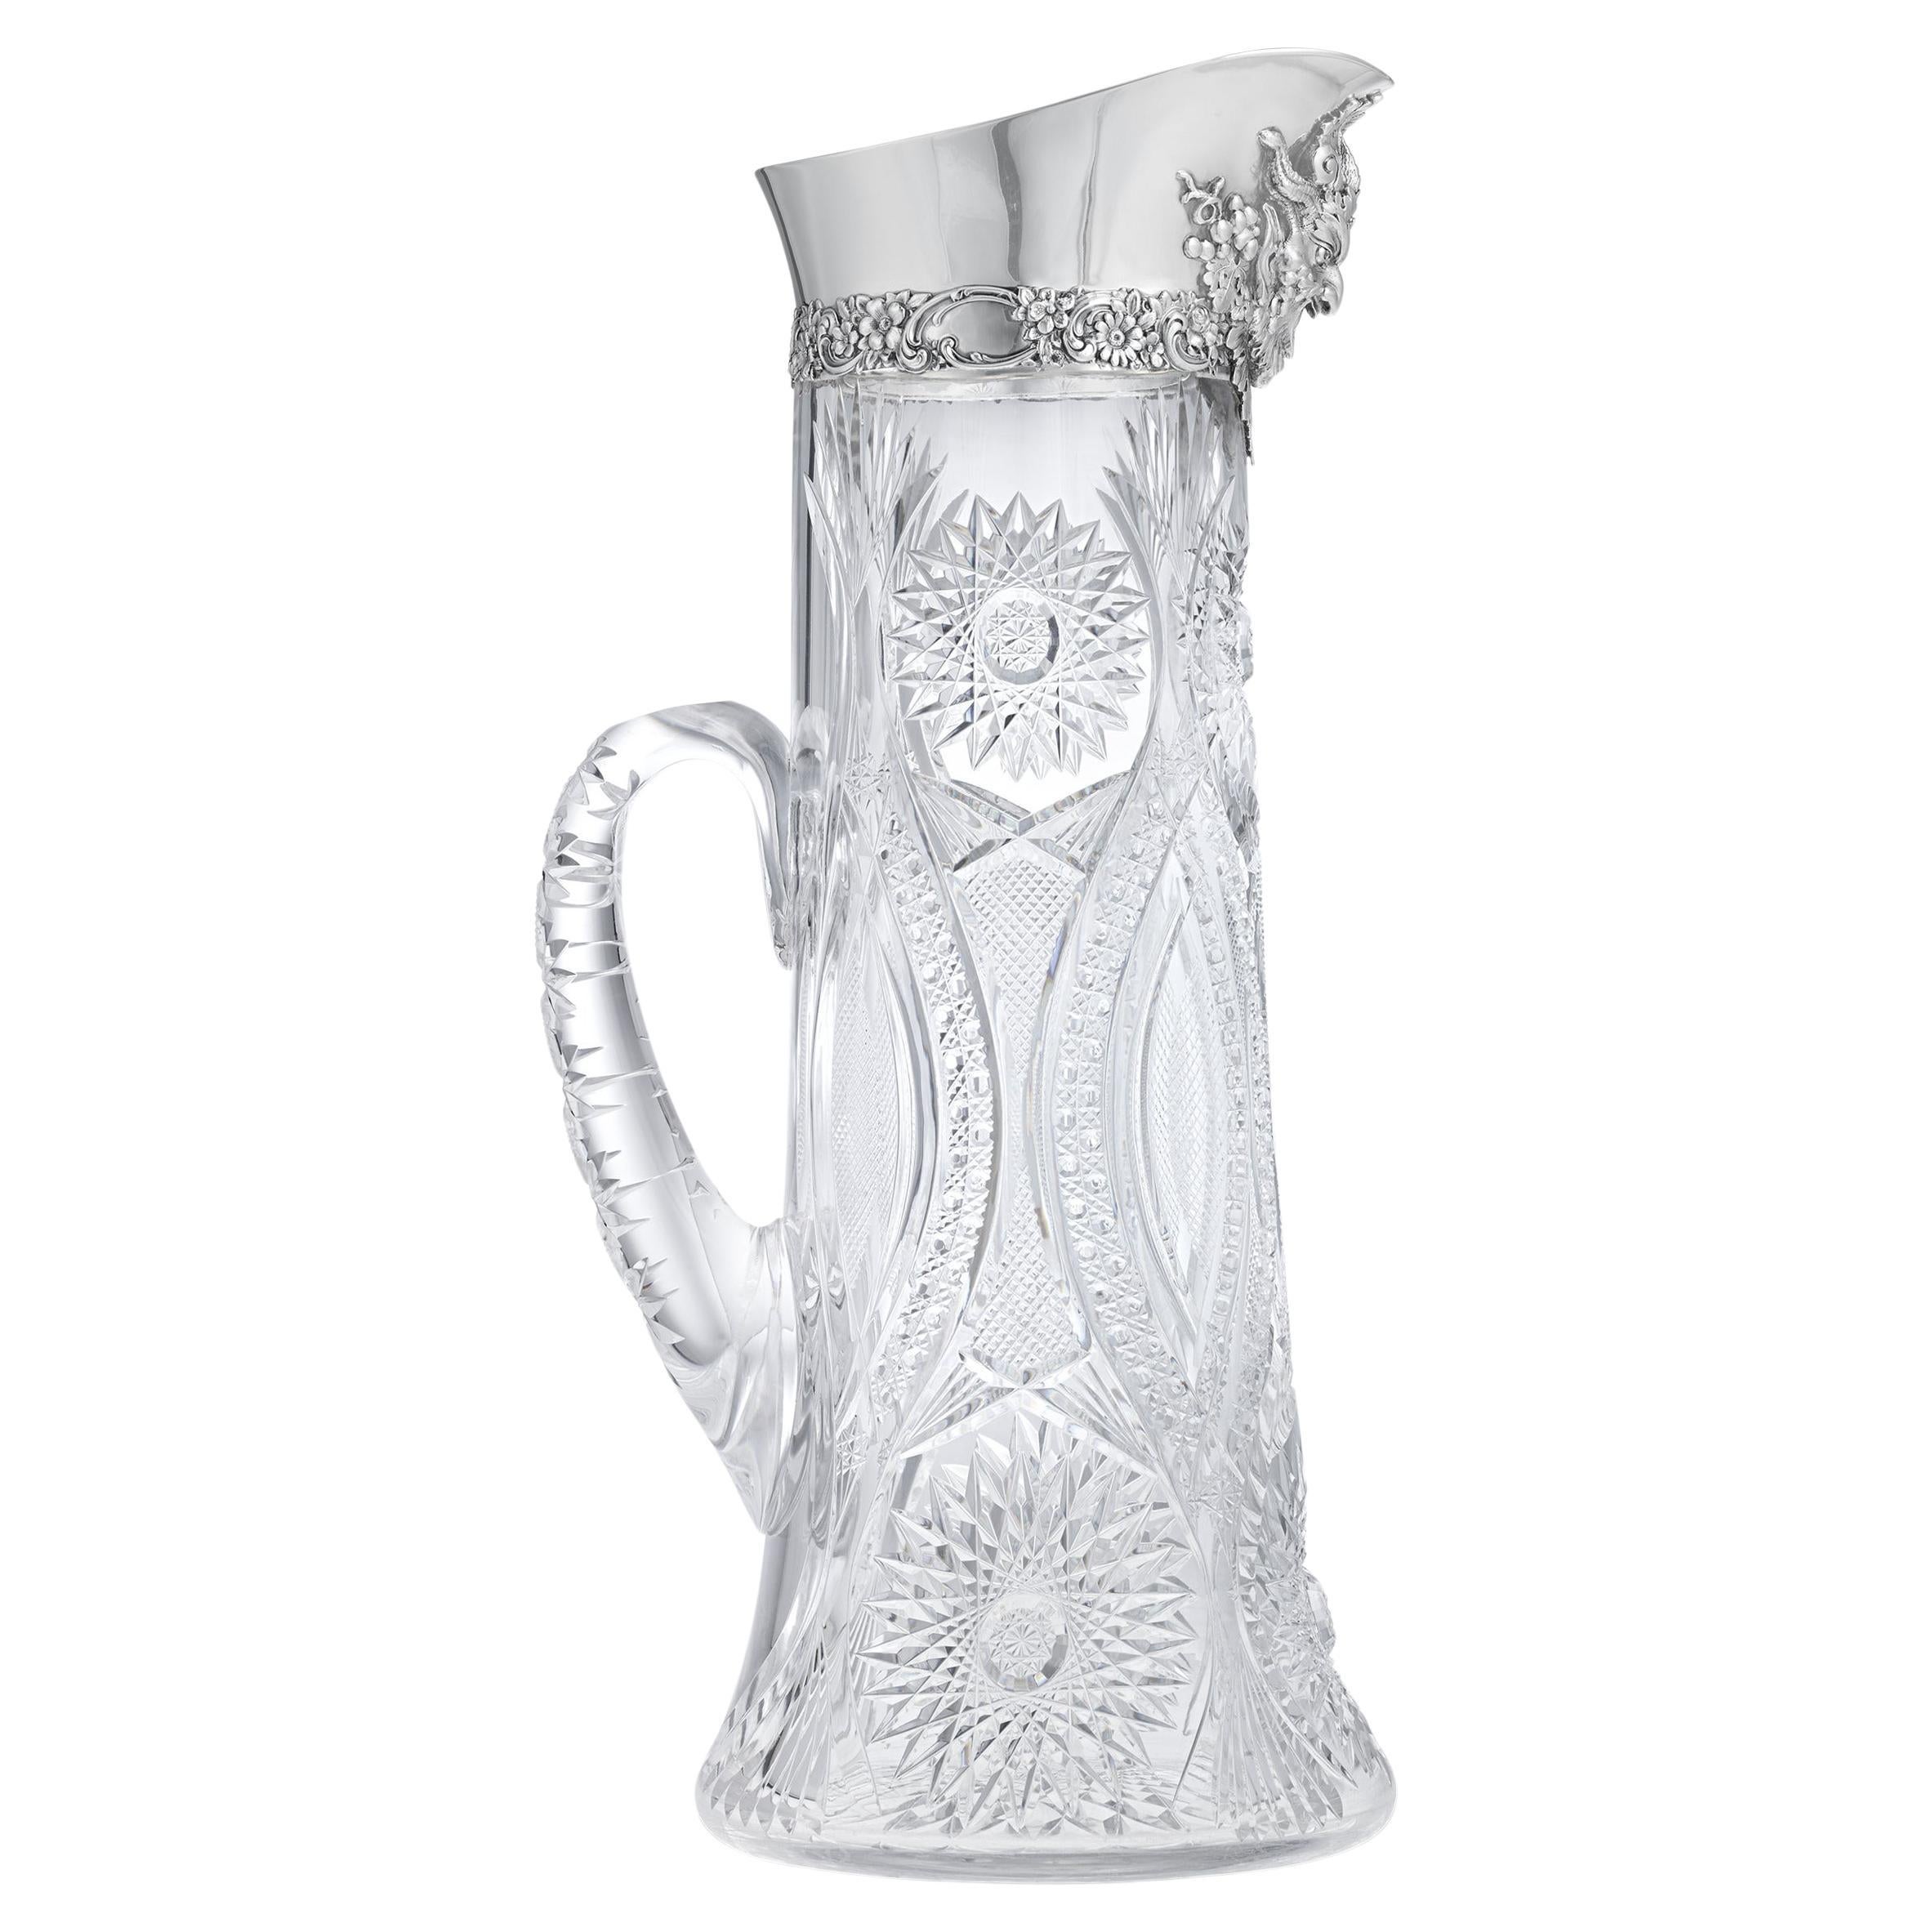 Tiffany & Co. Silver And Cut Glass Pitcher For Sale